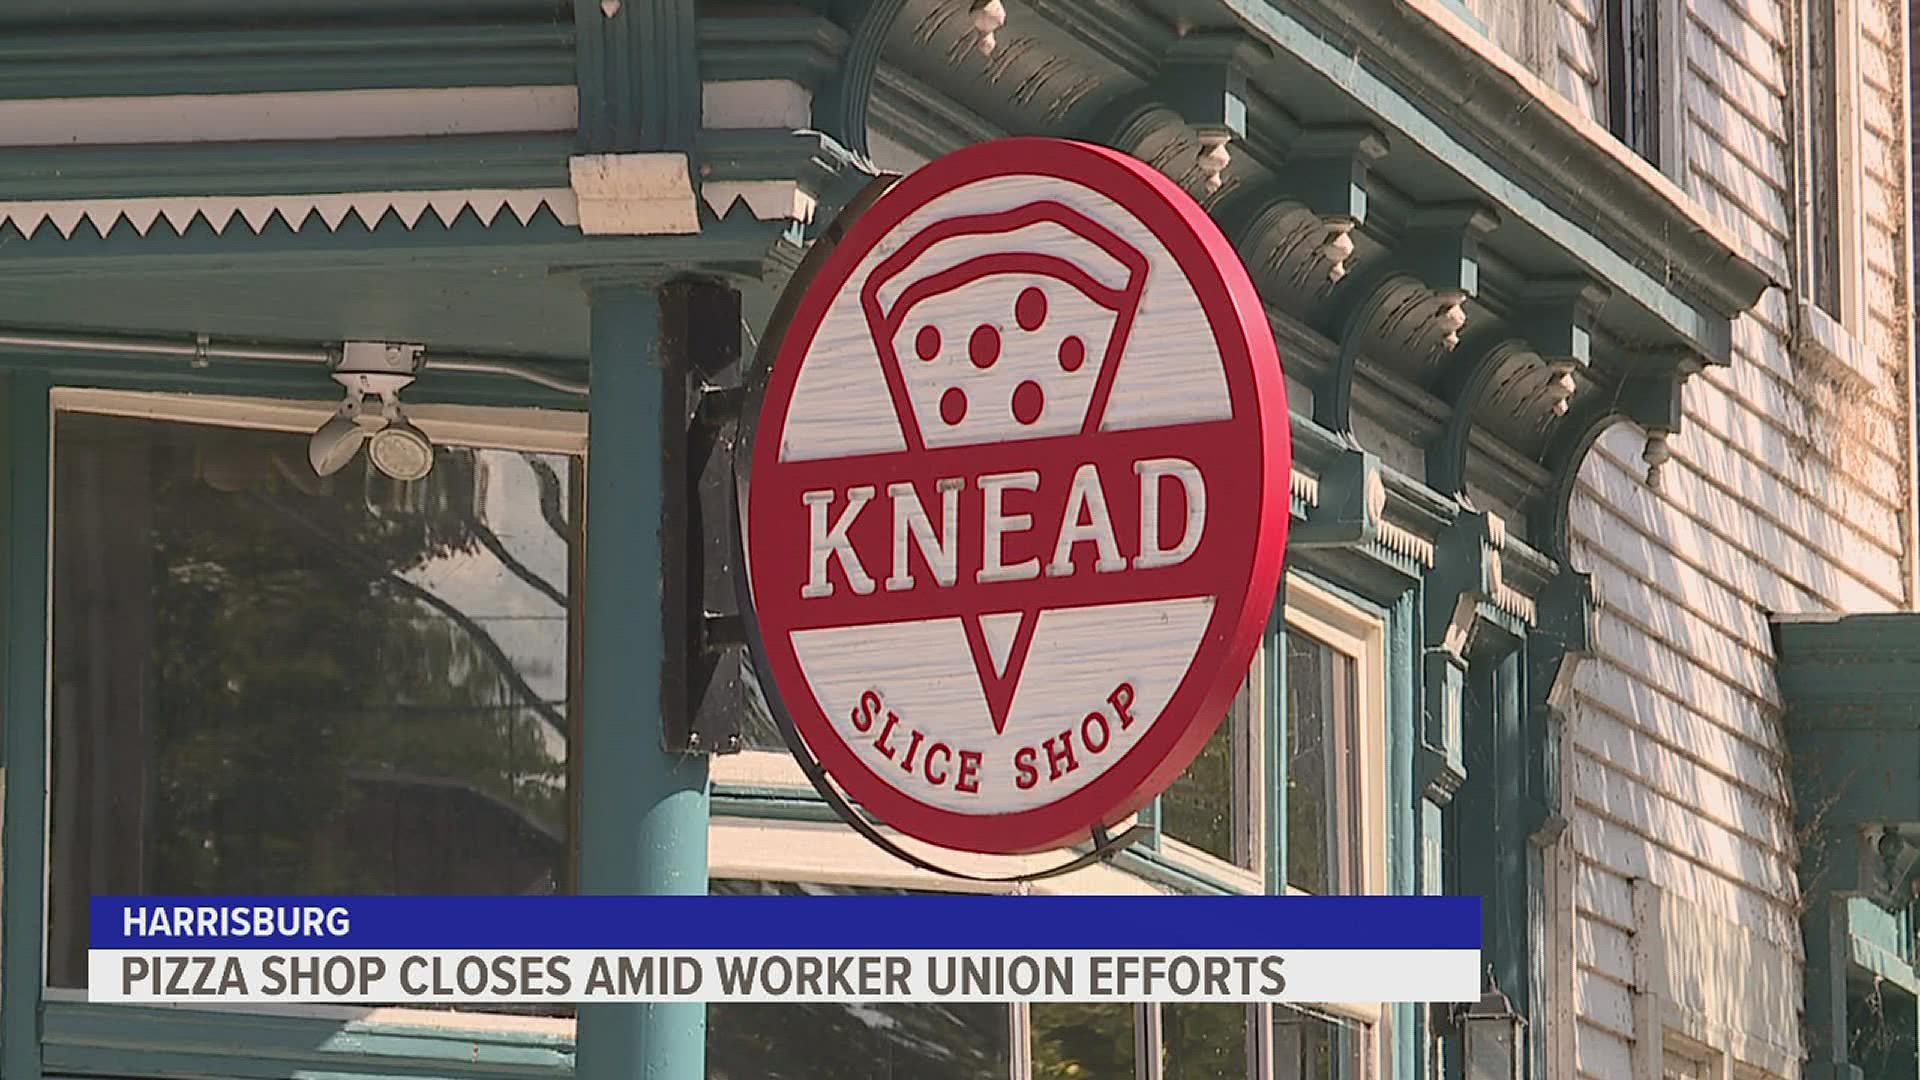 Knead Slice Shop announced on its Instagram account Tuesday it would be ceasing operations, effective immediately.